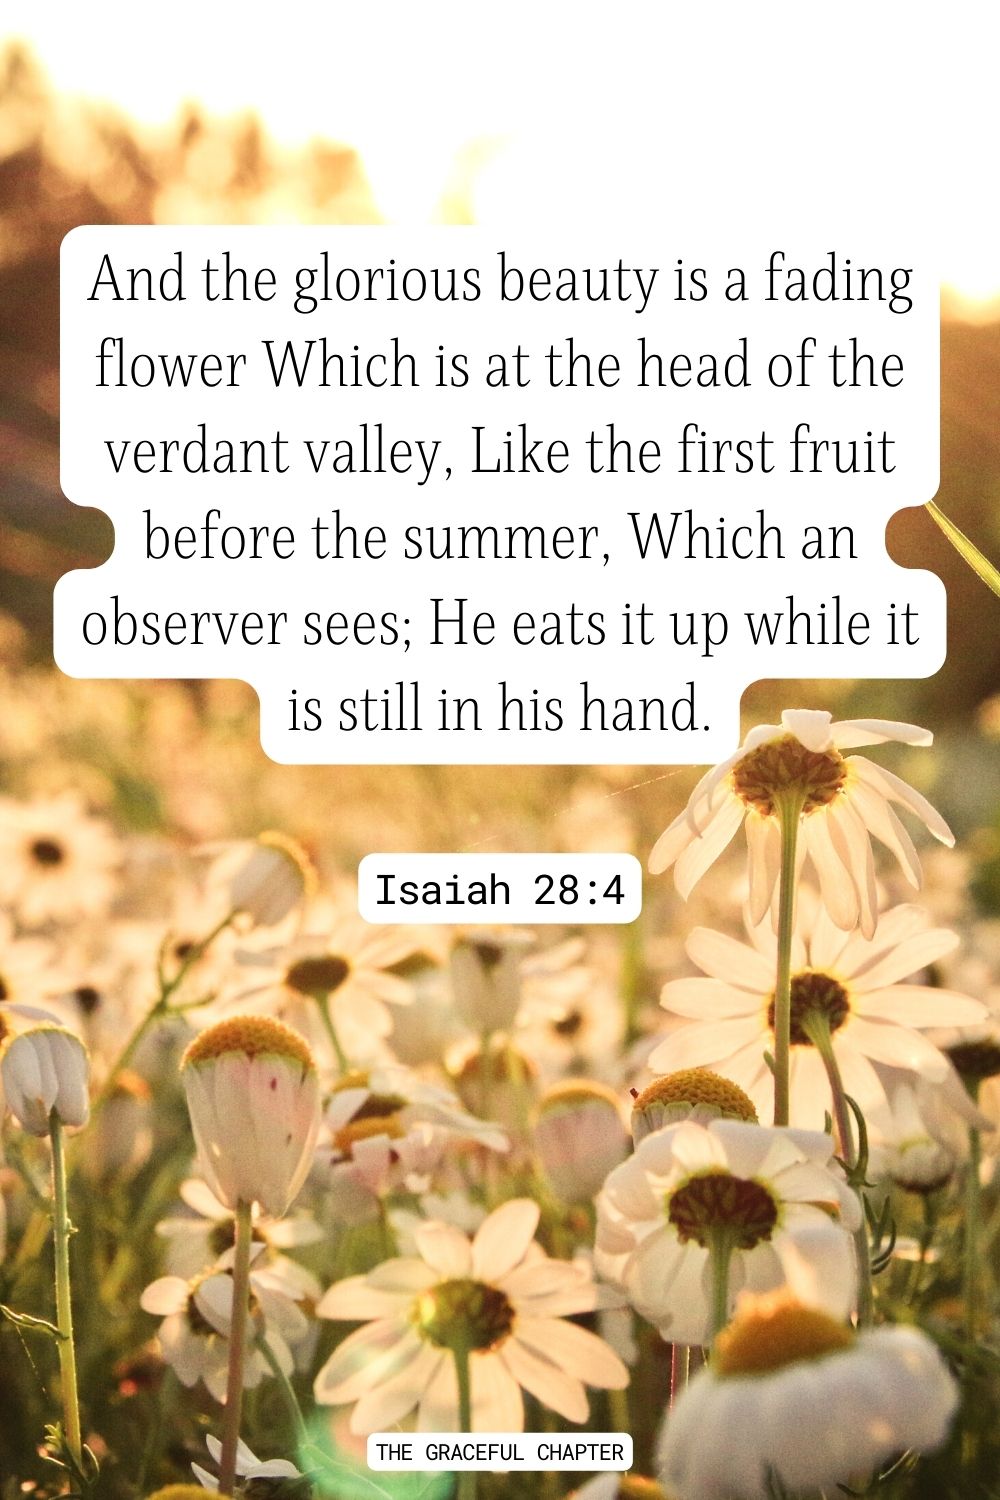 And the glorious beauty is a fading flower Which is at the head of the verdant valley, Like the first fruit before the summer, Which an observer sees; He eats it up while it is still in his hand. Isaiah 28:4